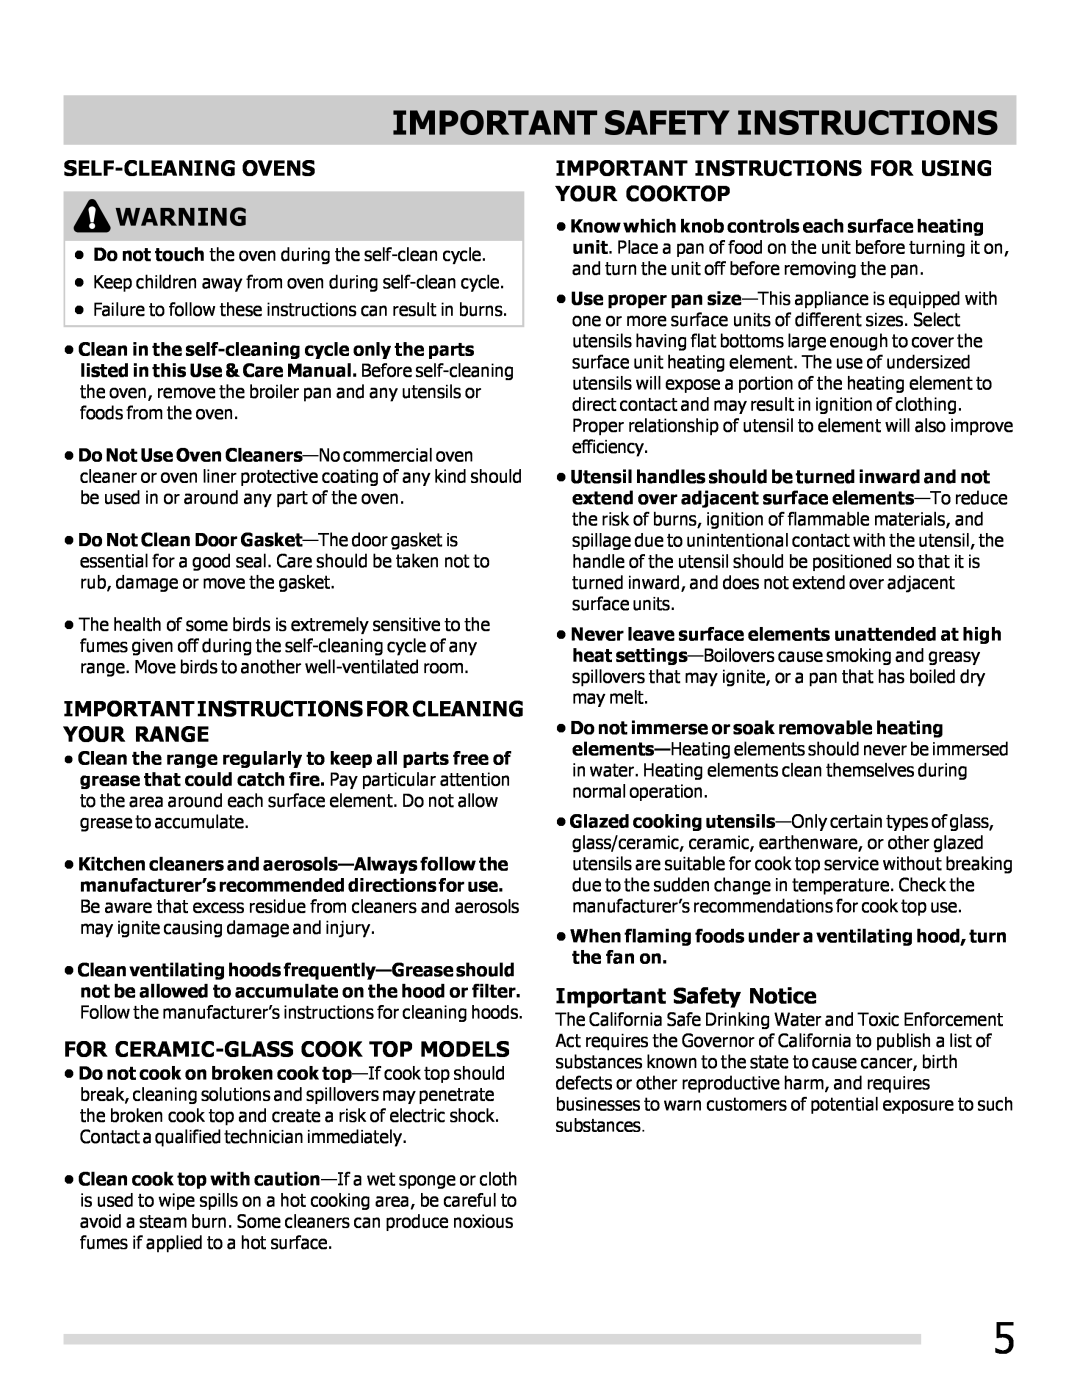 Frigidaire FPEF3081MF Self-Cleaning Ovens, Important Instructions For Cleaning Your Range, Important Safety Notice 